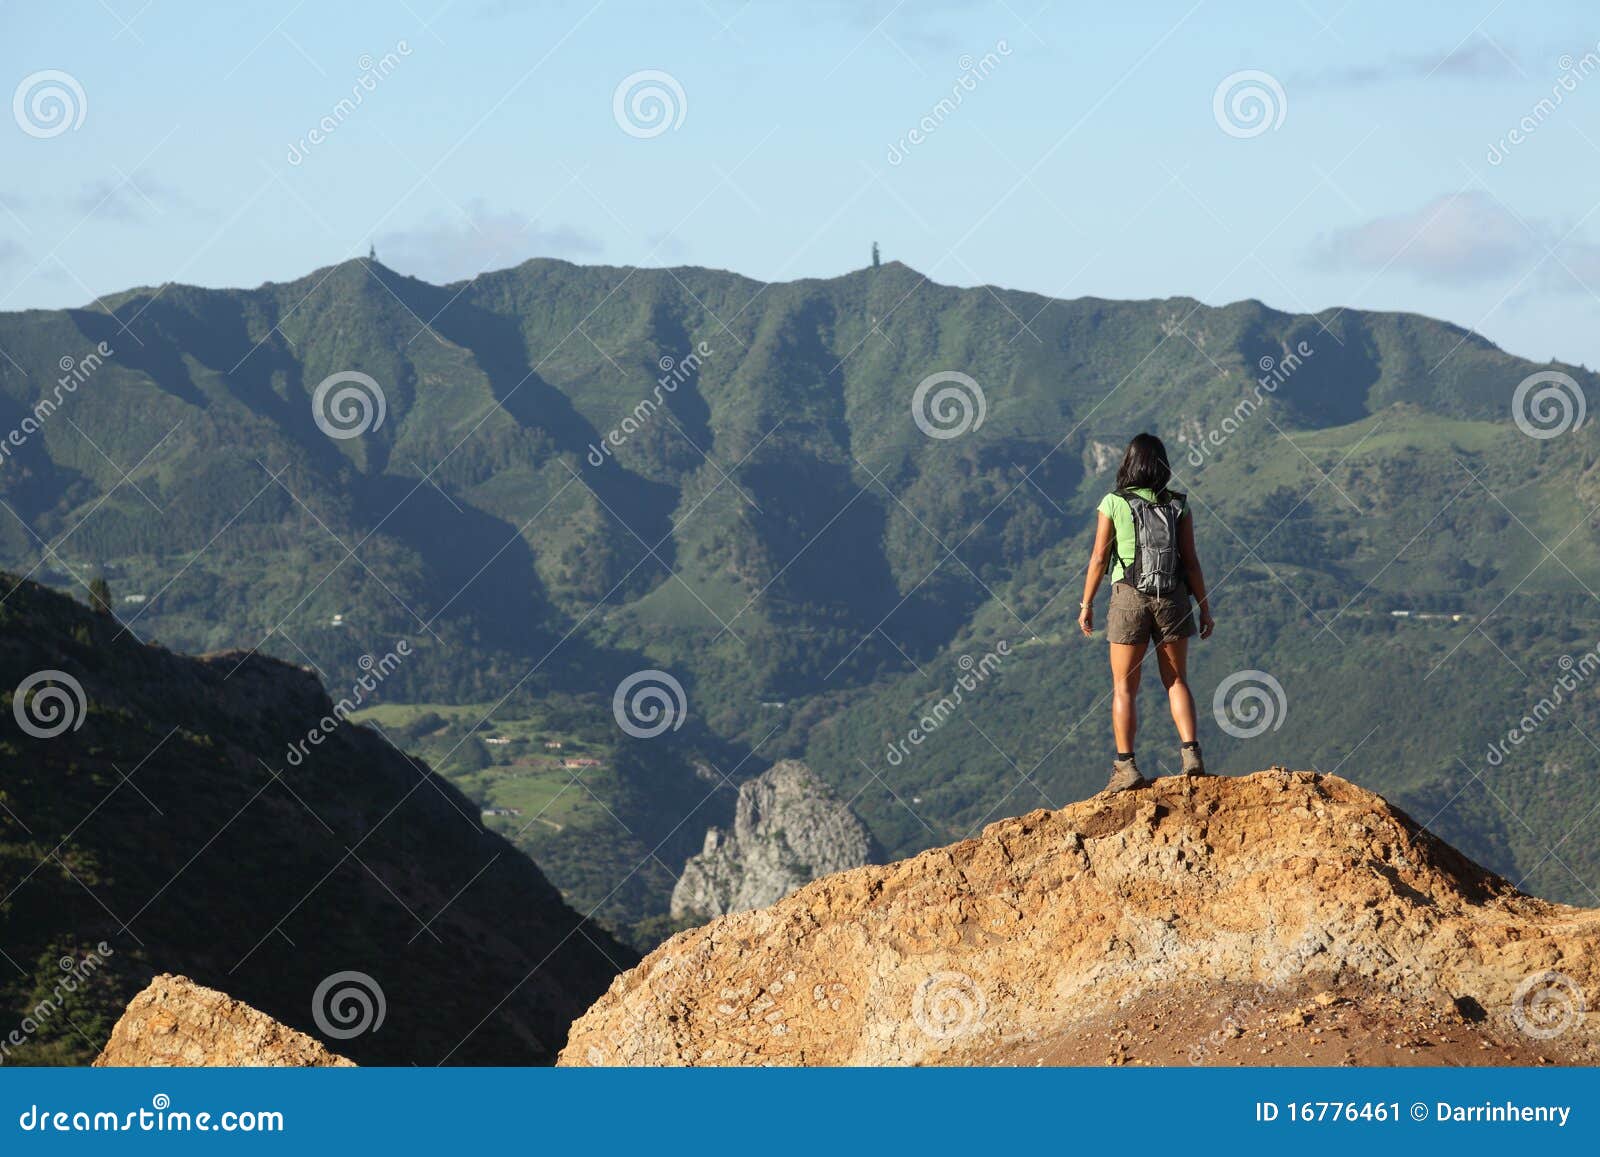 woman hiker viewing central peaks on st helena